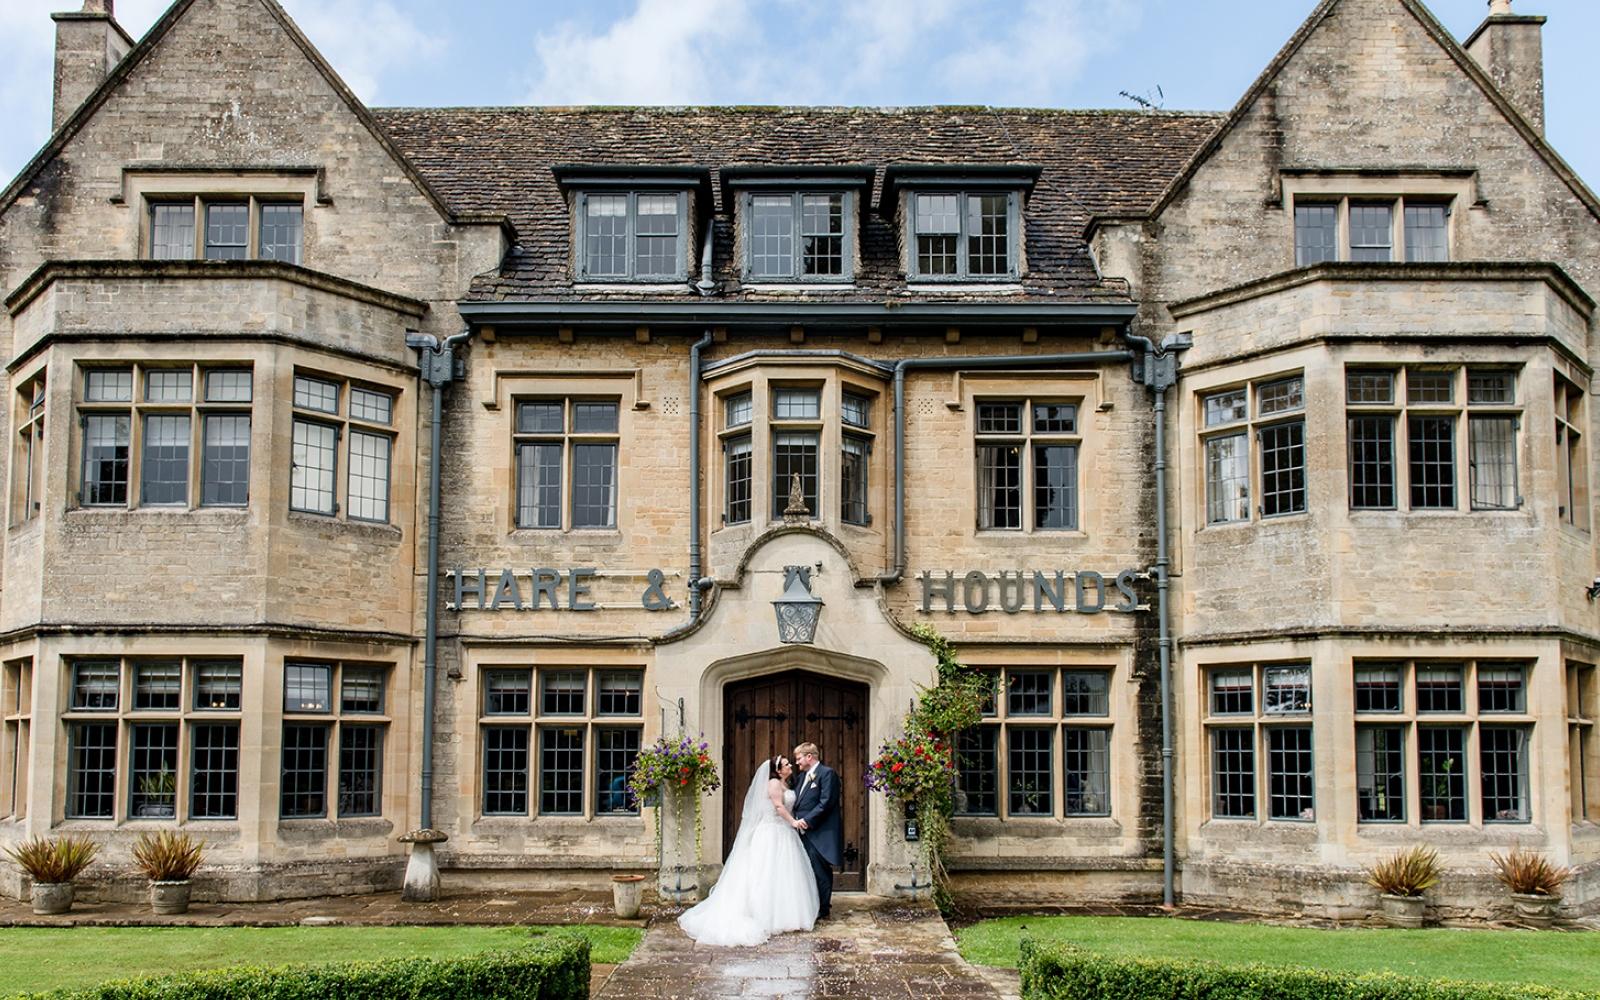 Capture Every Moment Real Wedding Photography Photographer duo Cirencester Hare and Hound Tetbury Cotswold stone wedding venue 